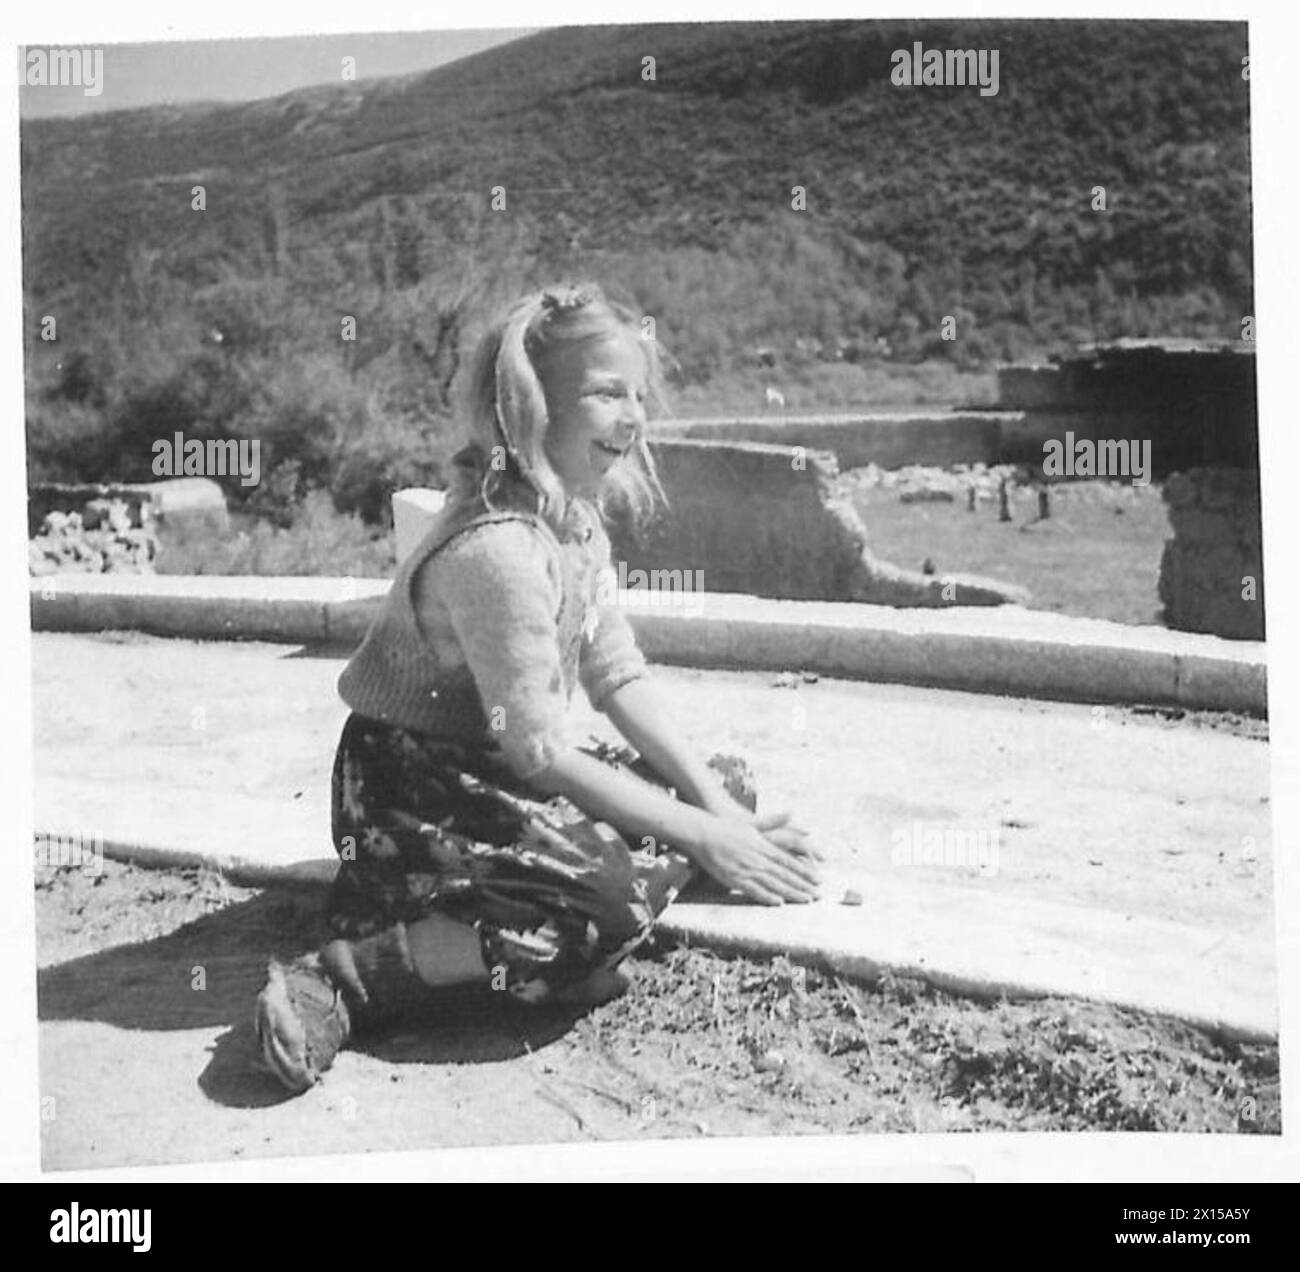 YUGOSLAVIA : LIFE IN THE BOSNIAN VILLAGE OF DRVAR - Even here the children play the games that English and American boys and girls know. This young girl is playing 'Dabs' or 'Five Stones' as we know it British Army Stock Photo